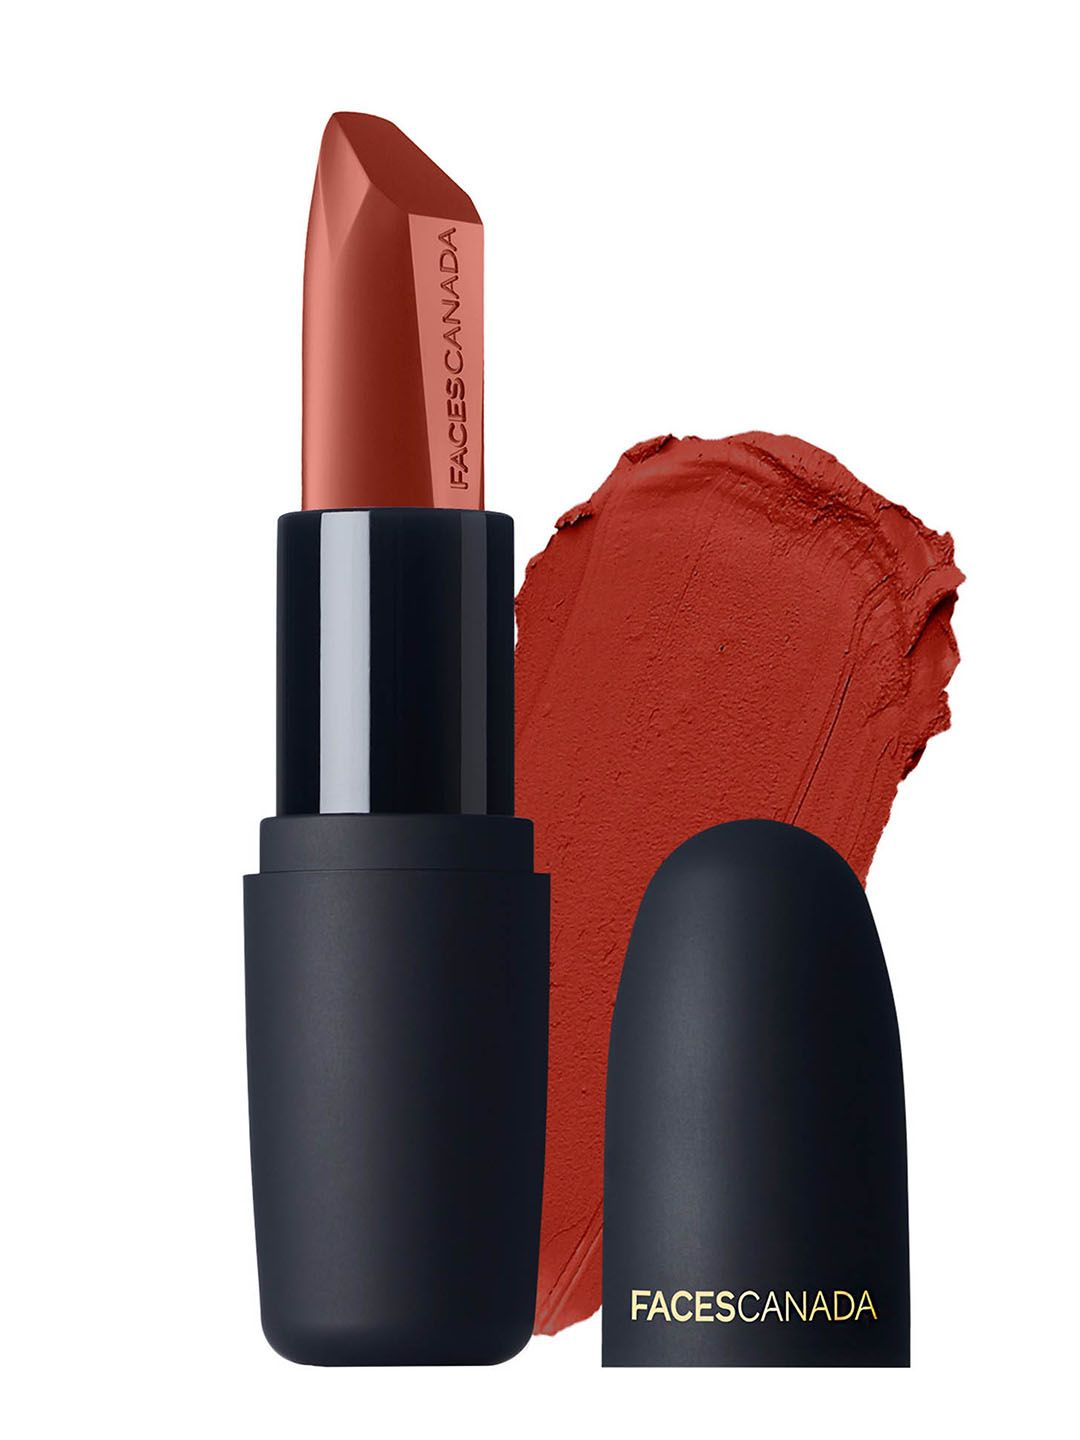 Faces Canada Weightless Matte Hydrating Lipstick with Almond Oil - Blooming Red 22 Price in India